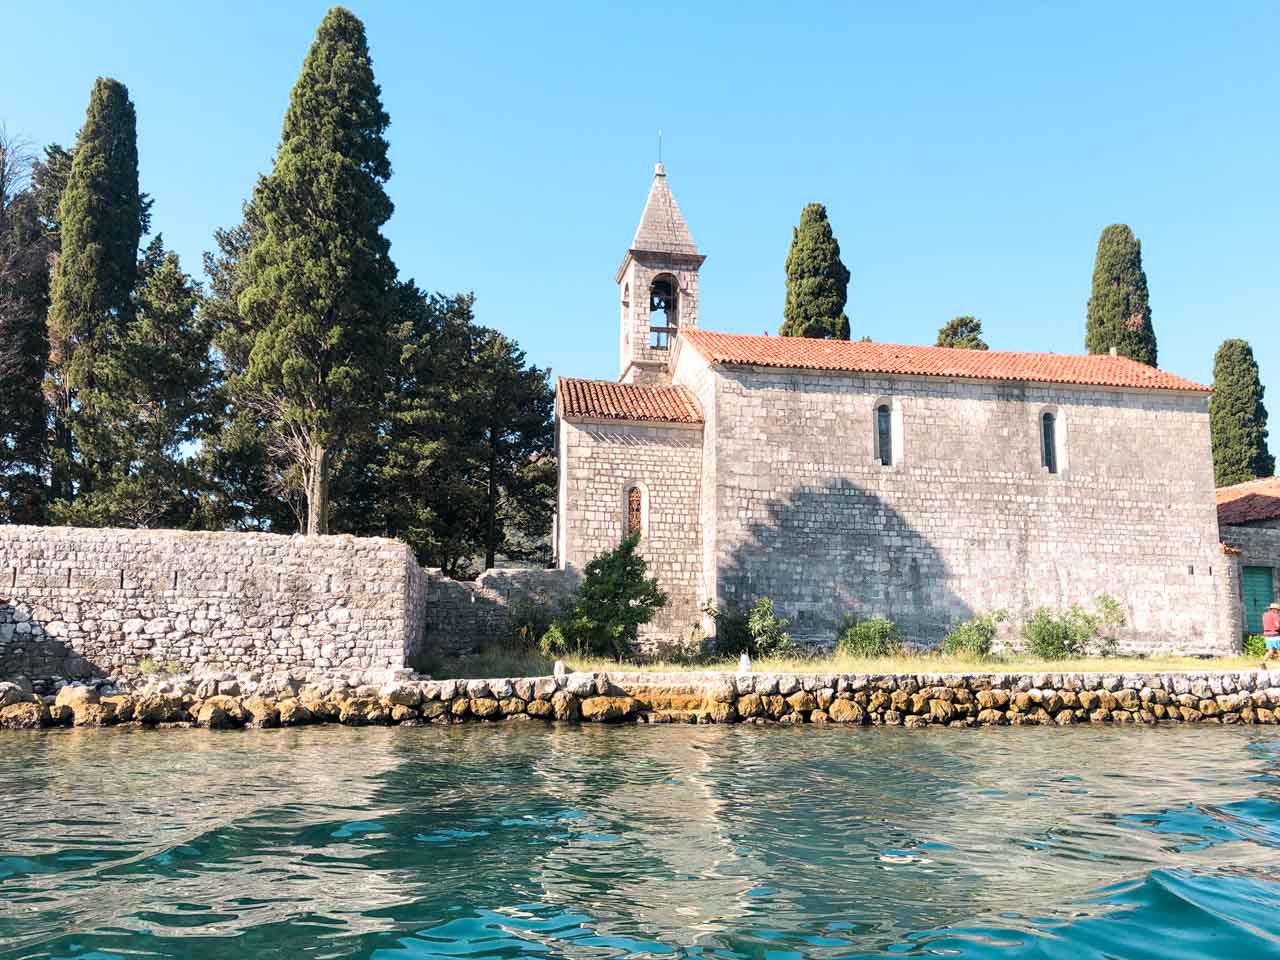 St. George Island off the coast of Perast in the Bay of Kotor, Montenegro